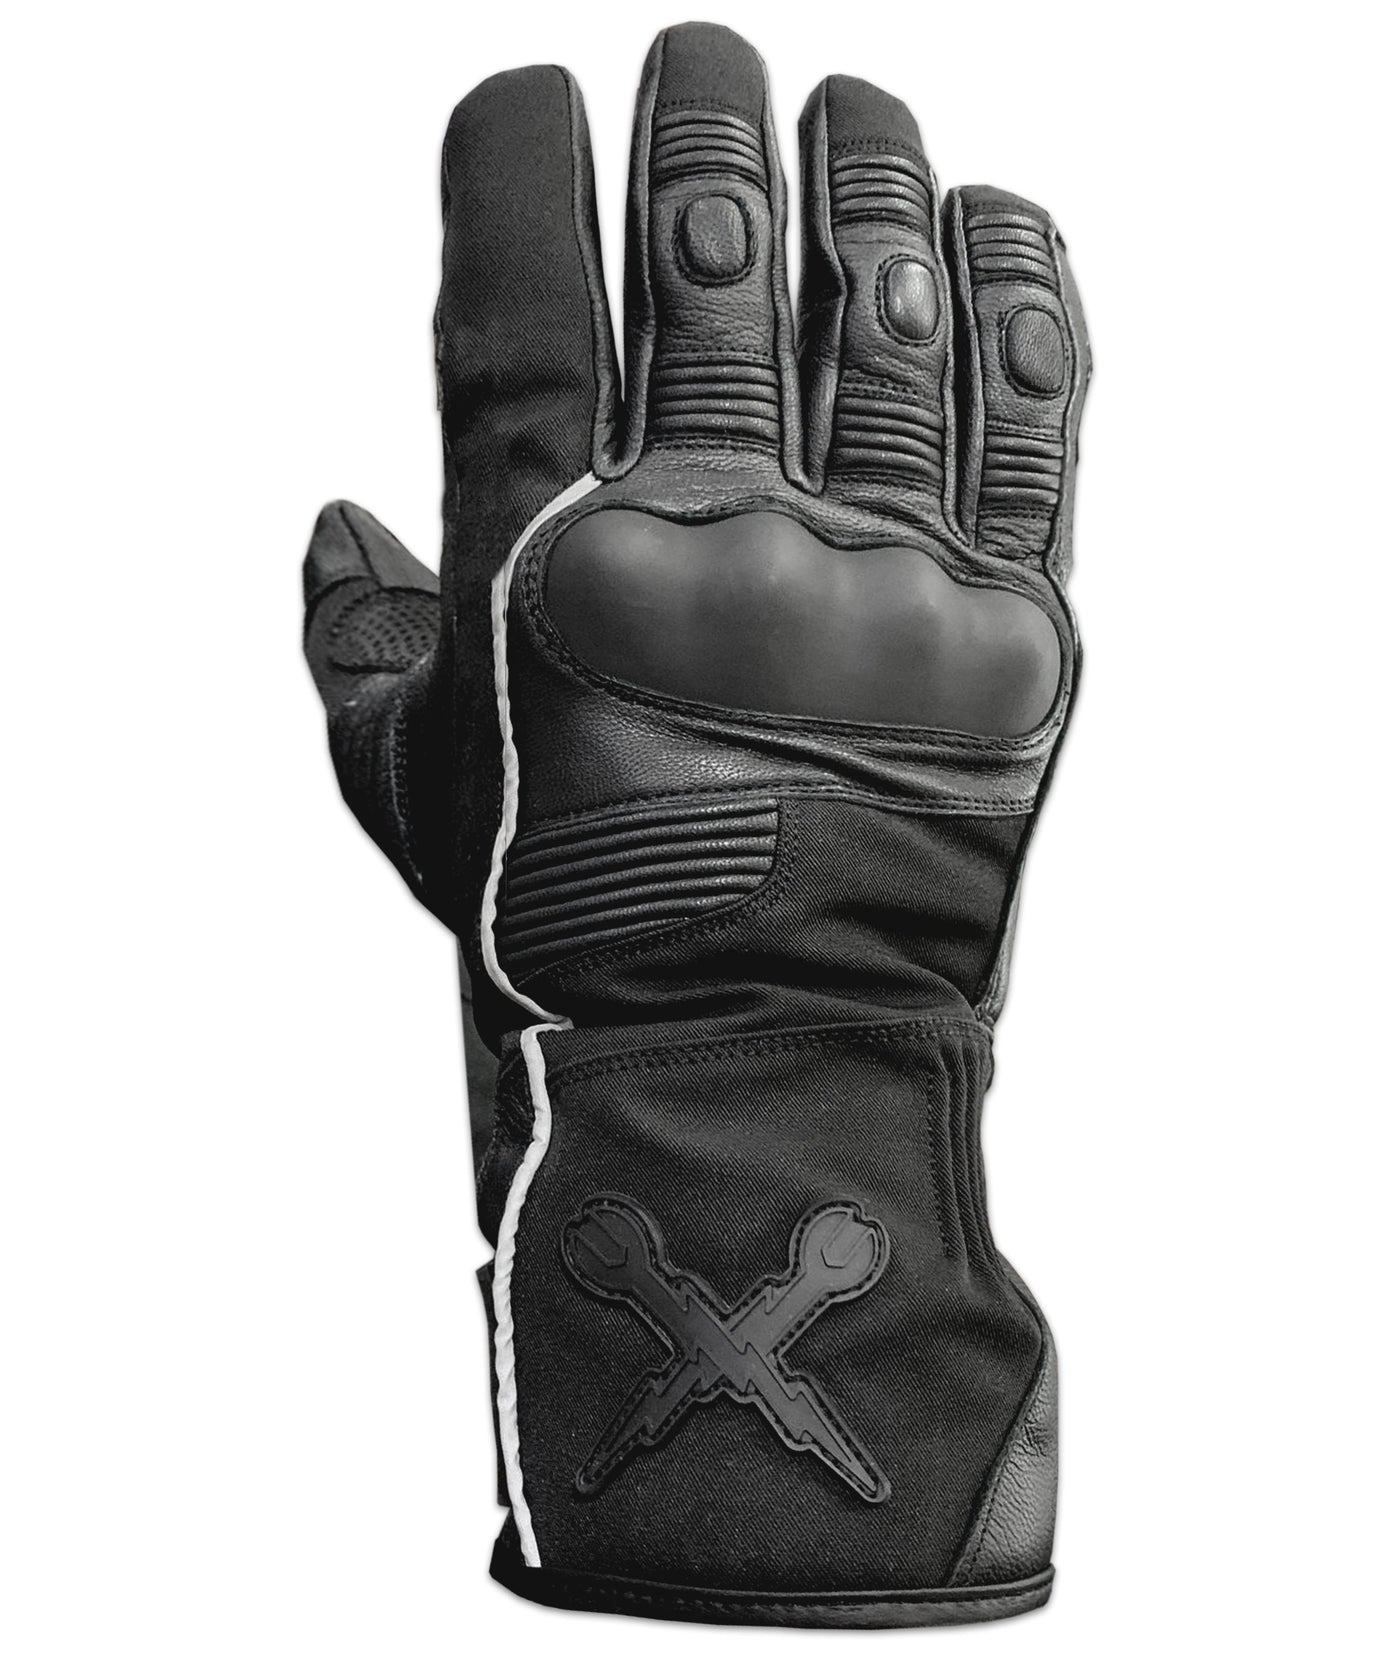 Back side of TMC Weatherproof Gloves.  Features the Torque logo, waterproof material, and pvc knuckle guards